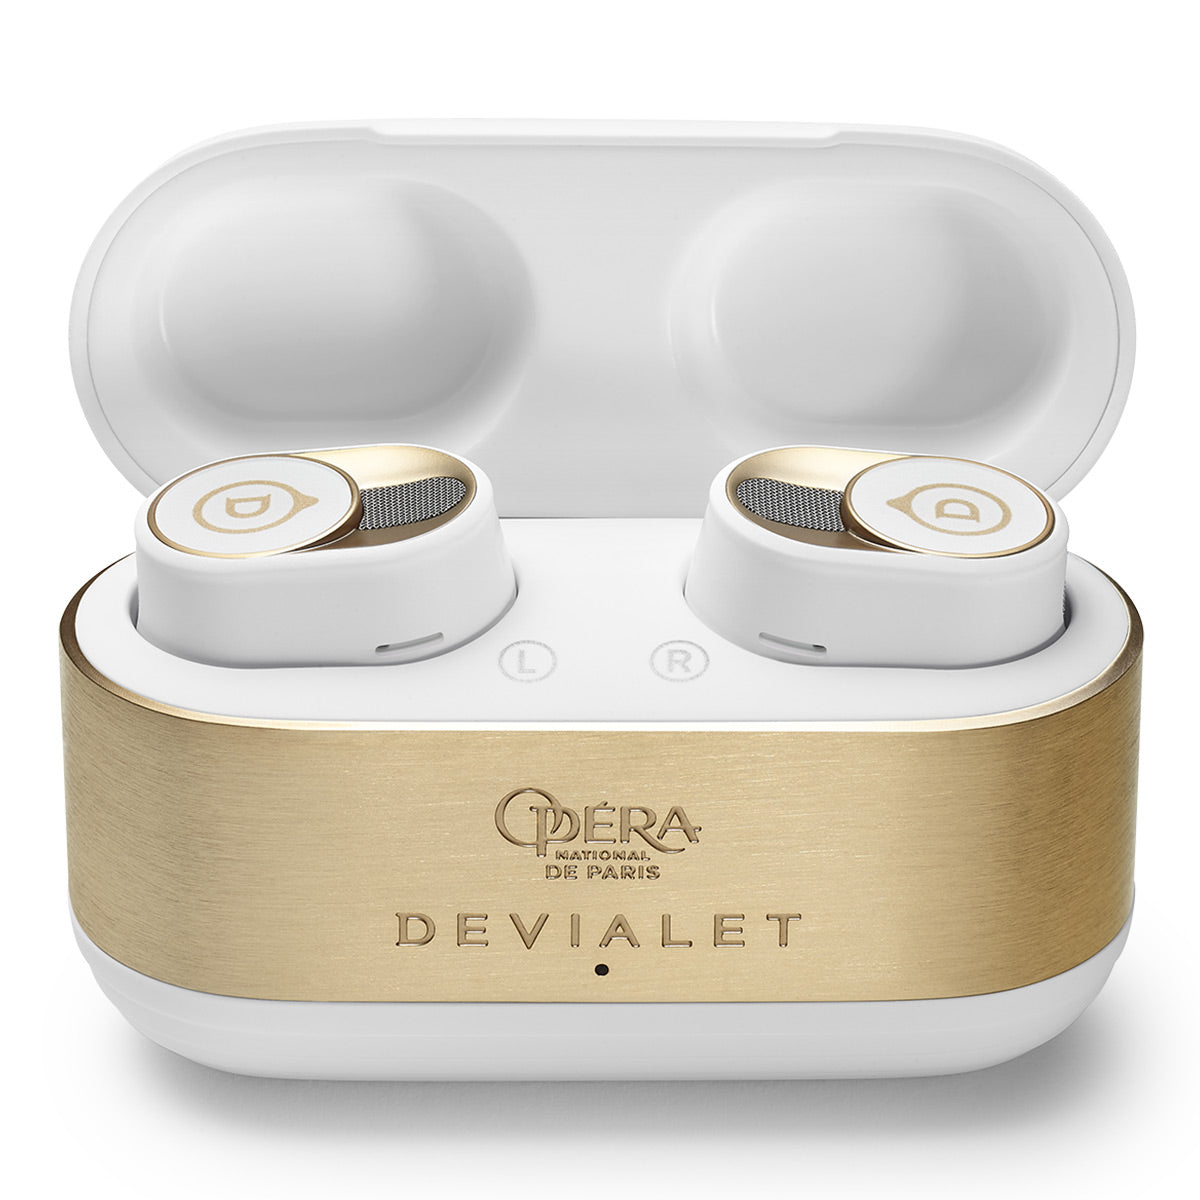 Devialet Gemini II True Wireless Bluetooth Earbuds with Adaptive Noise Cancellation and Water Resistance - Opera de Paris Edition (Gold)